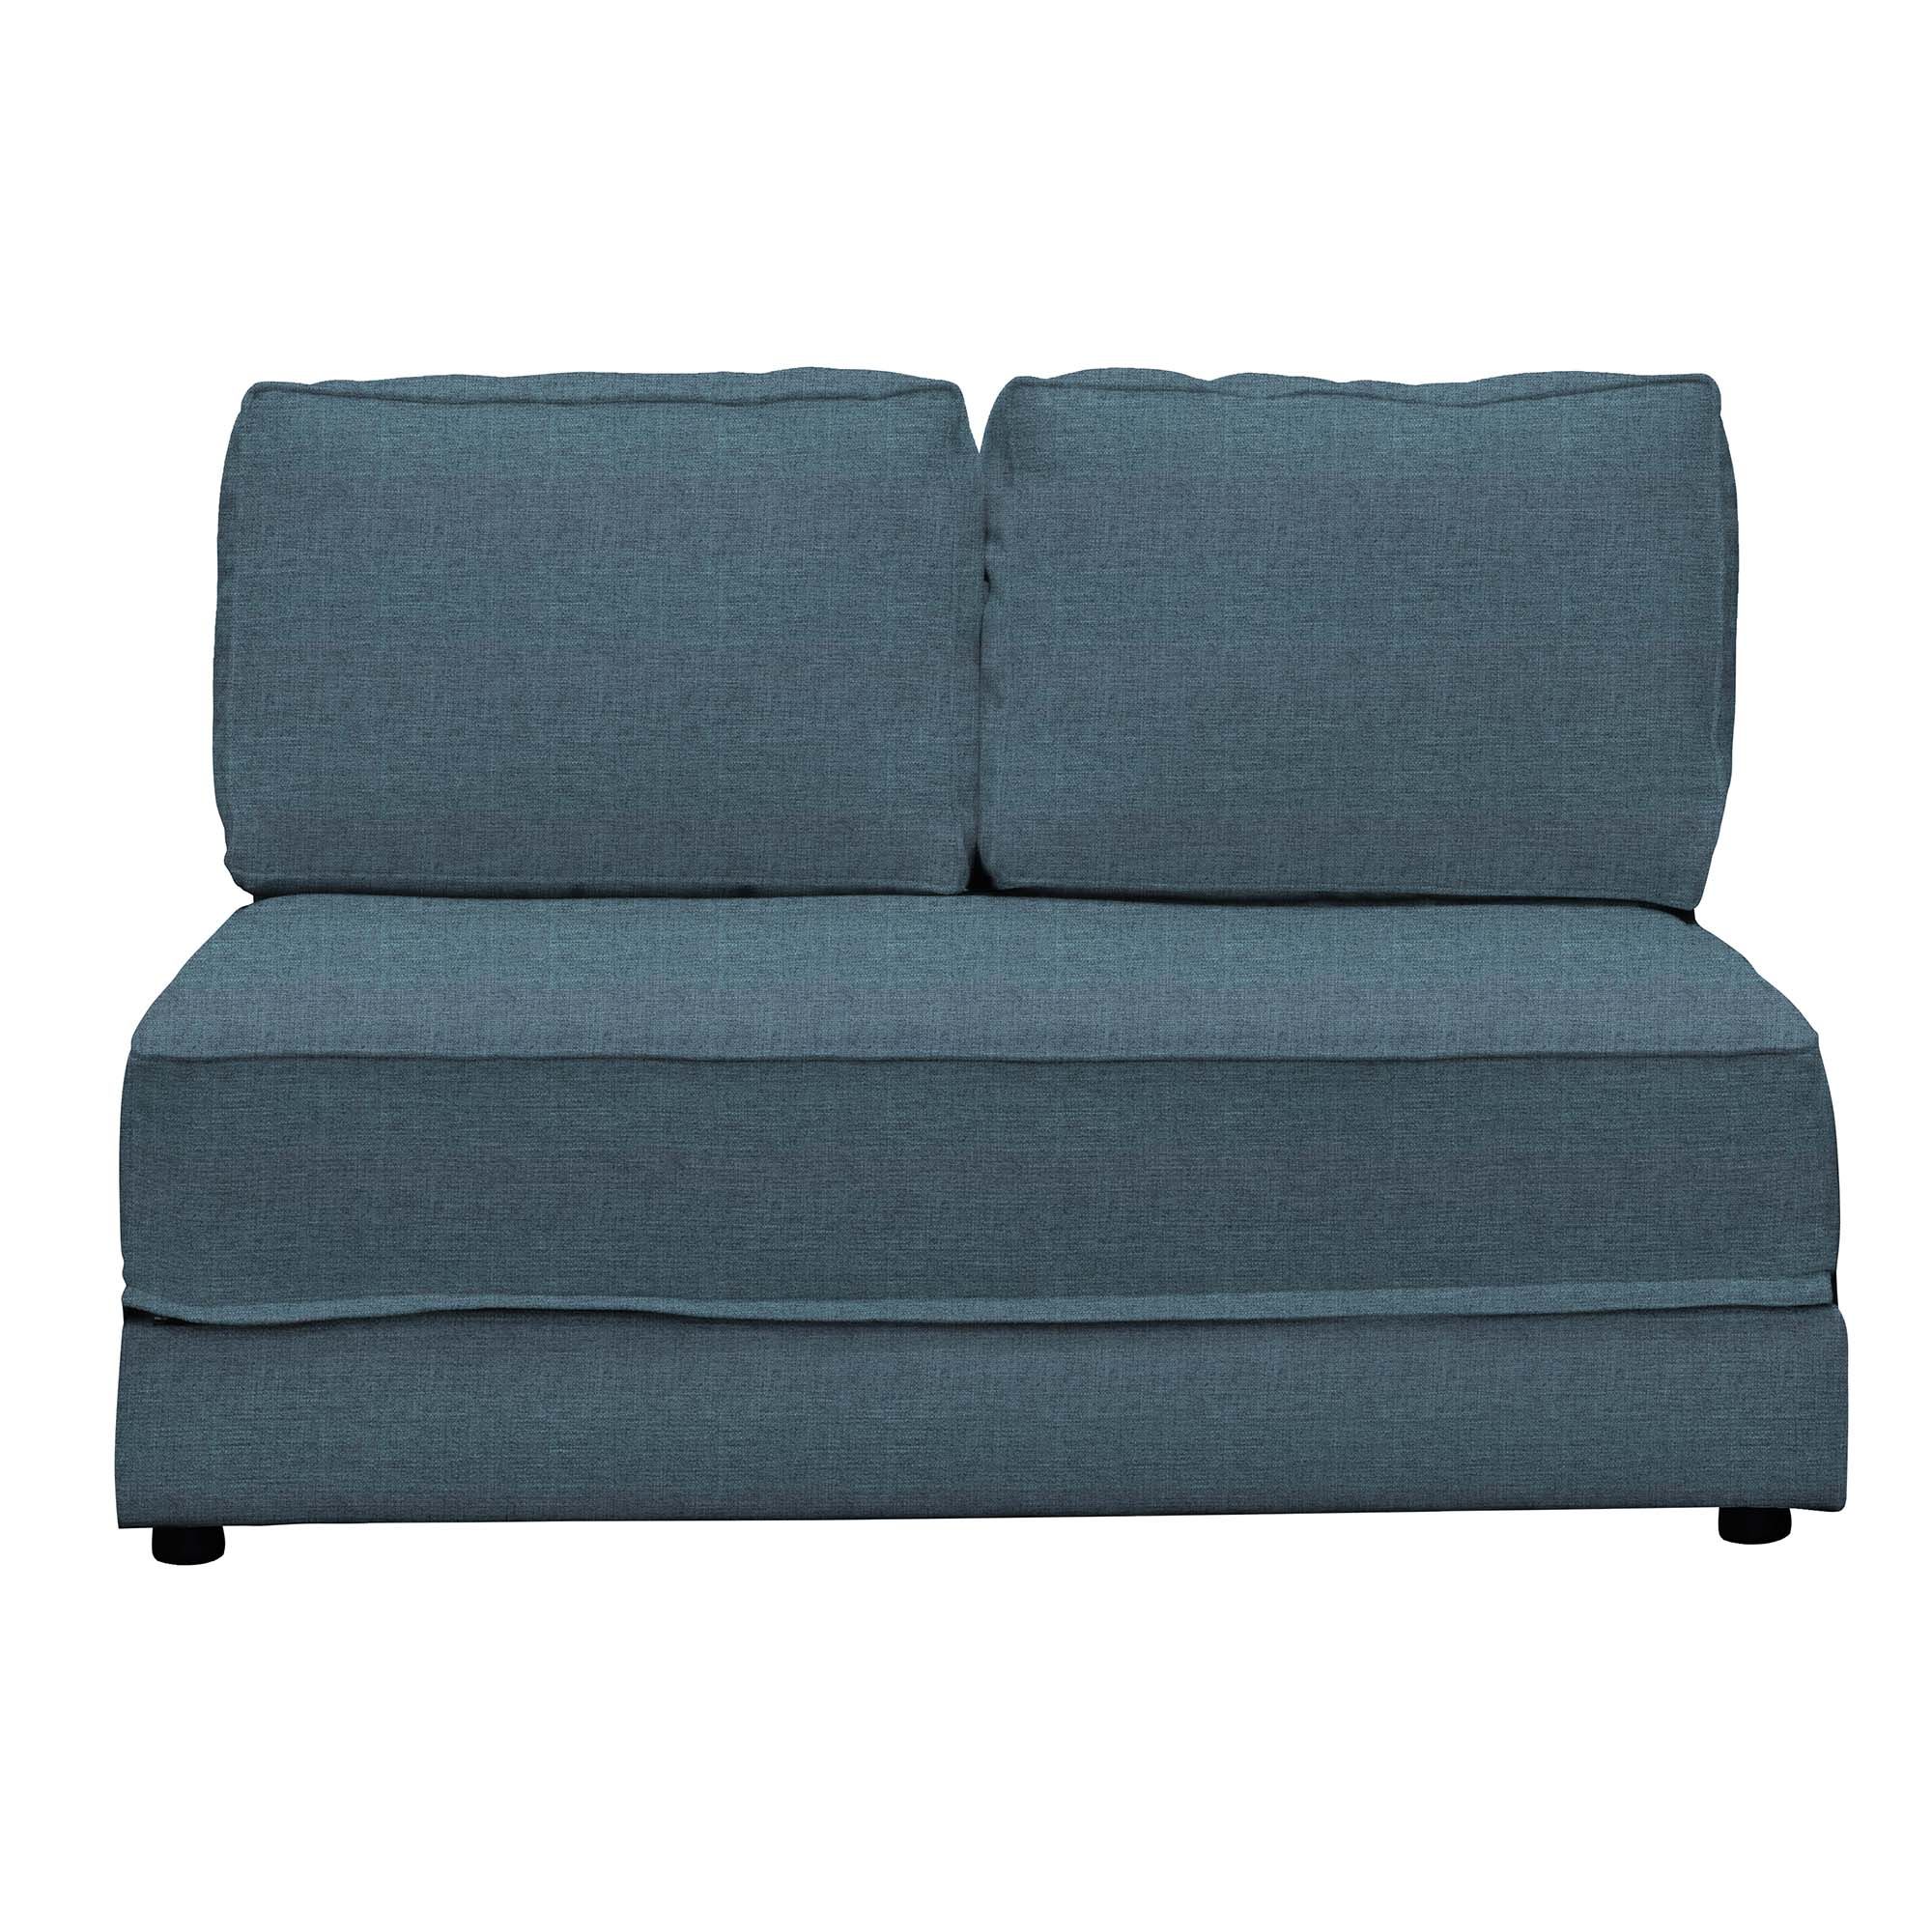 Clint Fabric Sofa Bed Clint 2 Seater Sofa Bed No Arms Fabric Shop Online Now Meubles